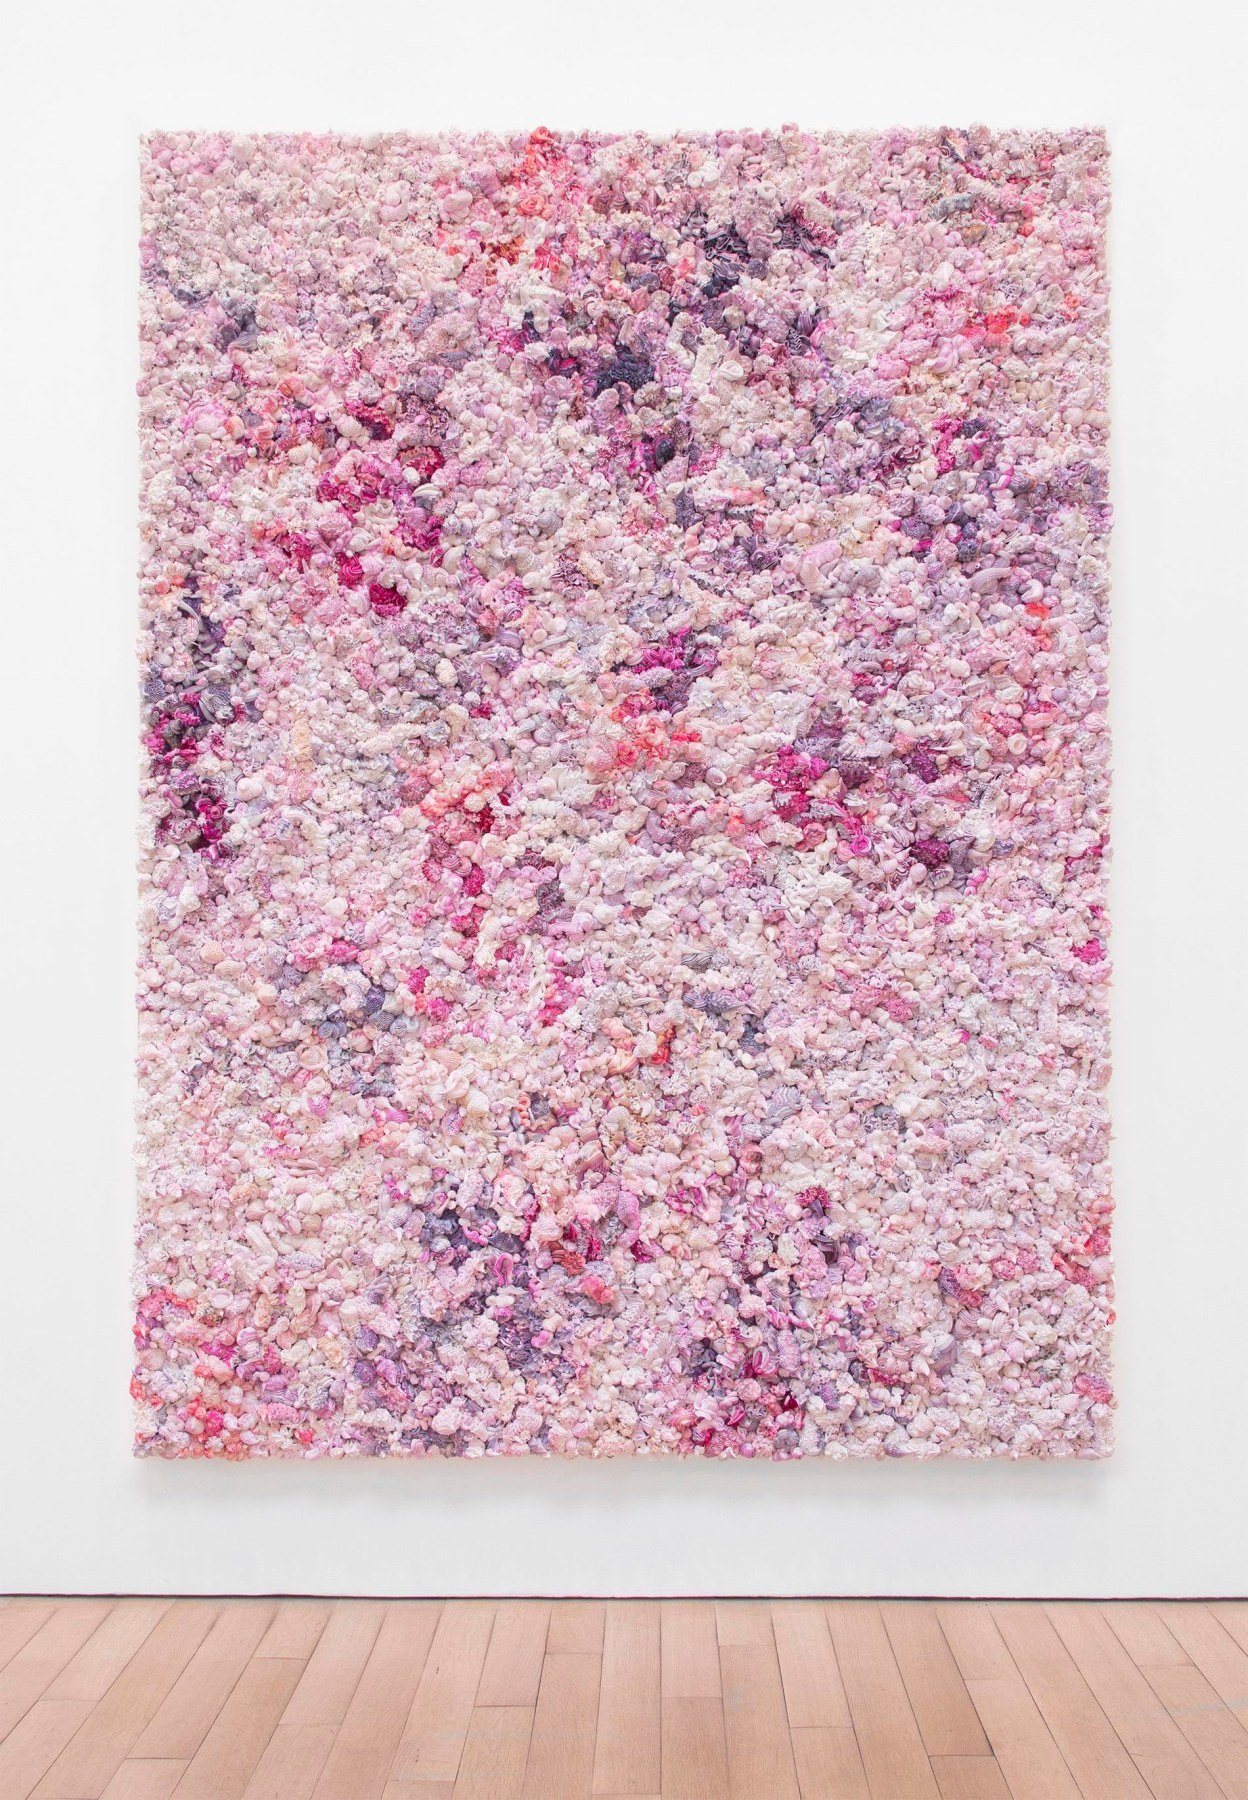 A series of pink, purple, white and red whipped-cream-like dollops made of oil paint on canvas